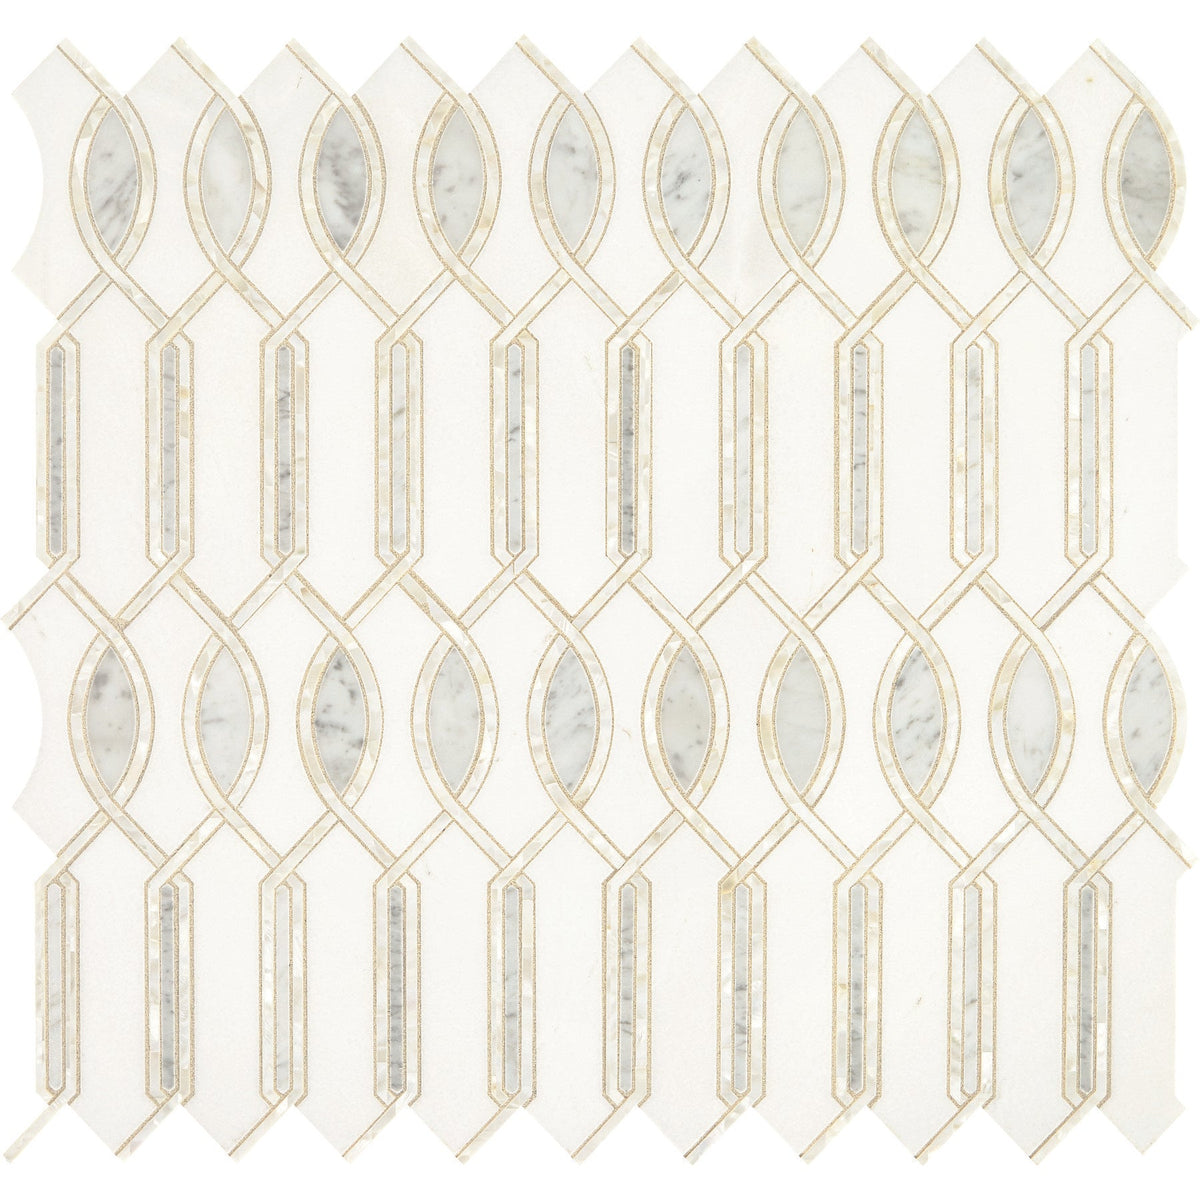 Daltile - Lavaliere Imaginare Mosaic - Thassos White With Carrara White and Mother of Pearl